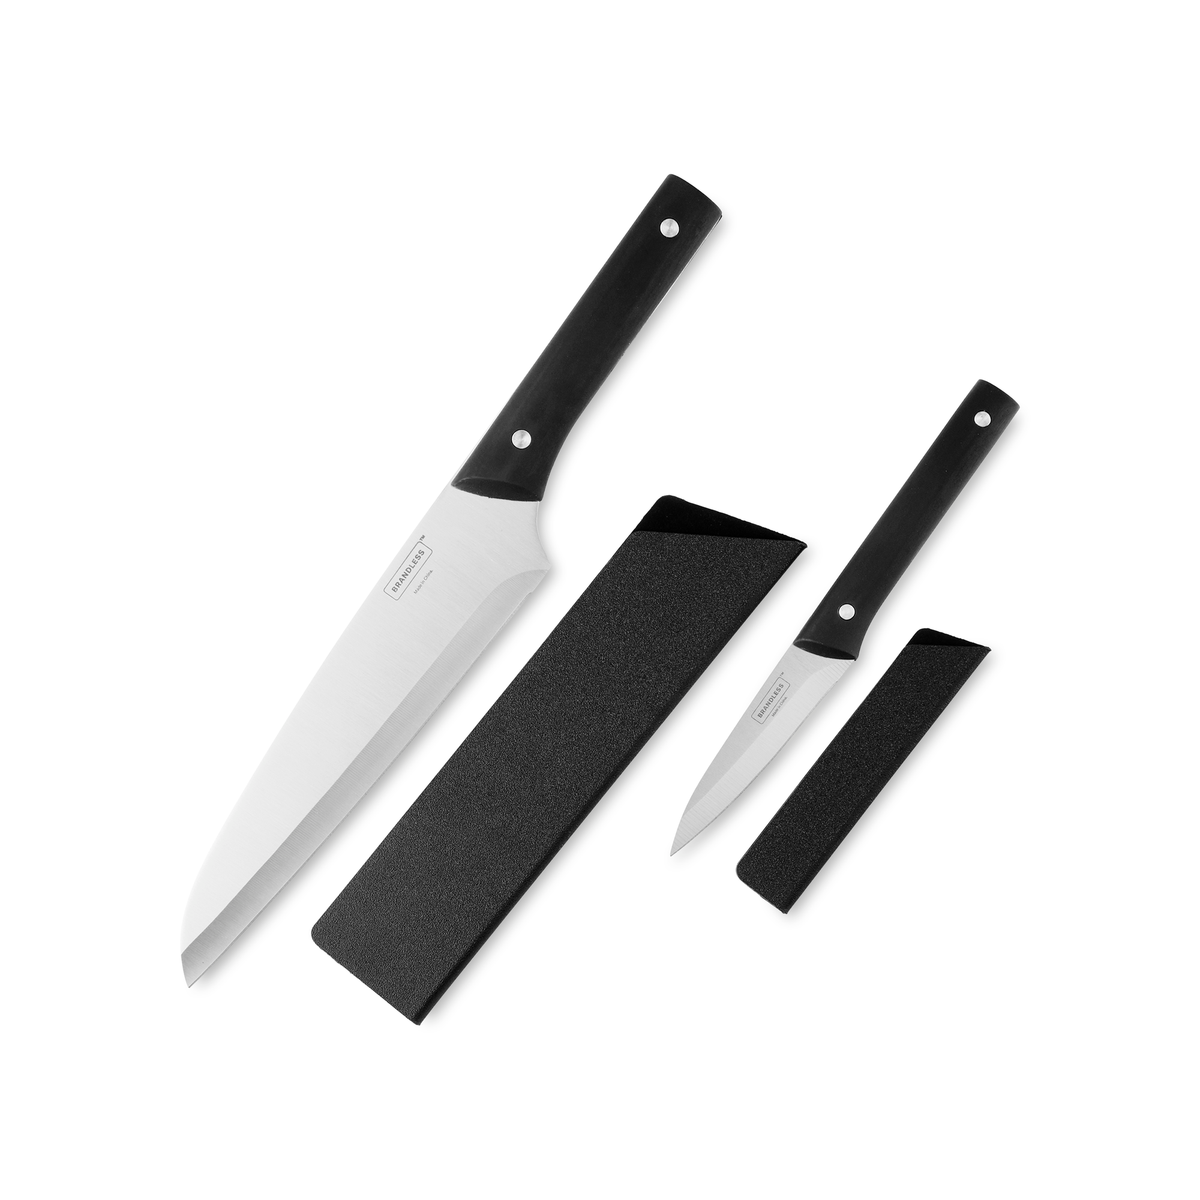 Knife blade covers beside knives overhead view